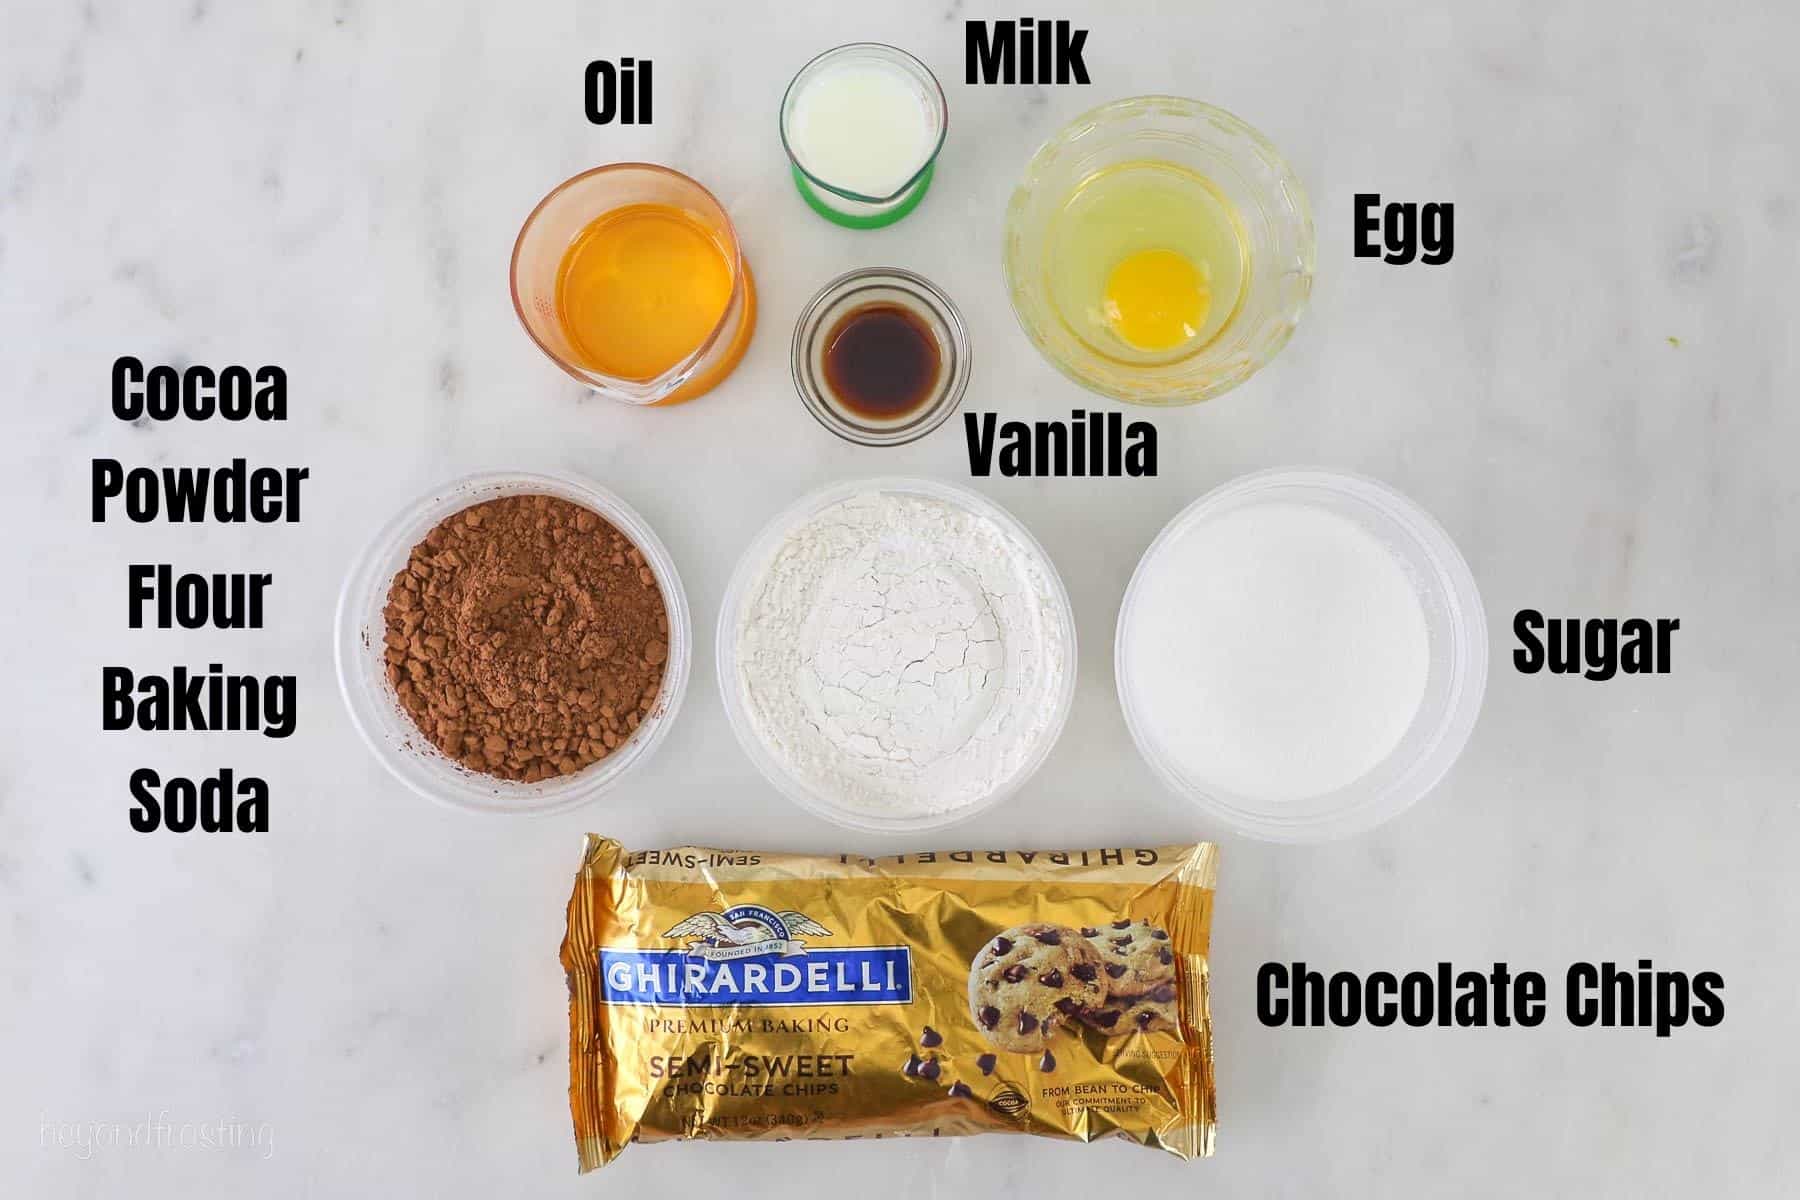 Ingredients for Cocoa Powder Brownies with text overlay